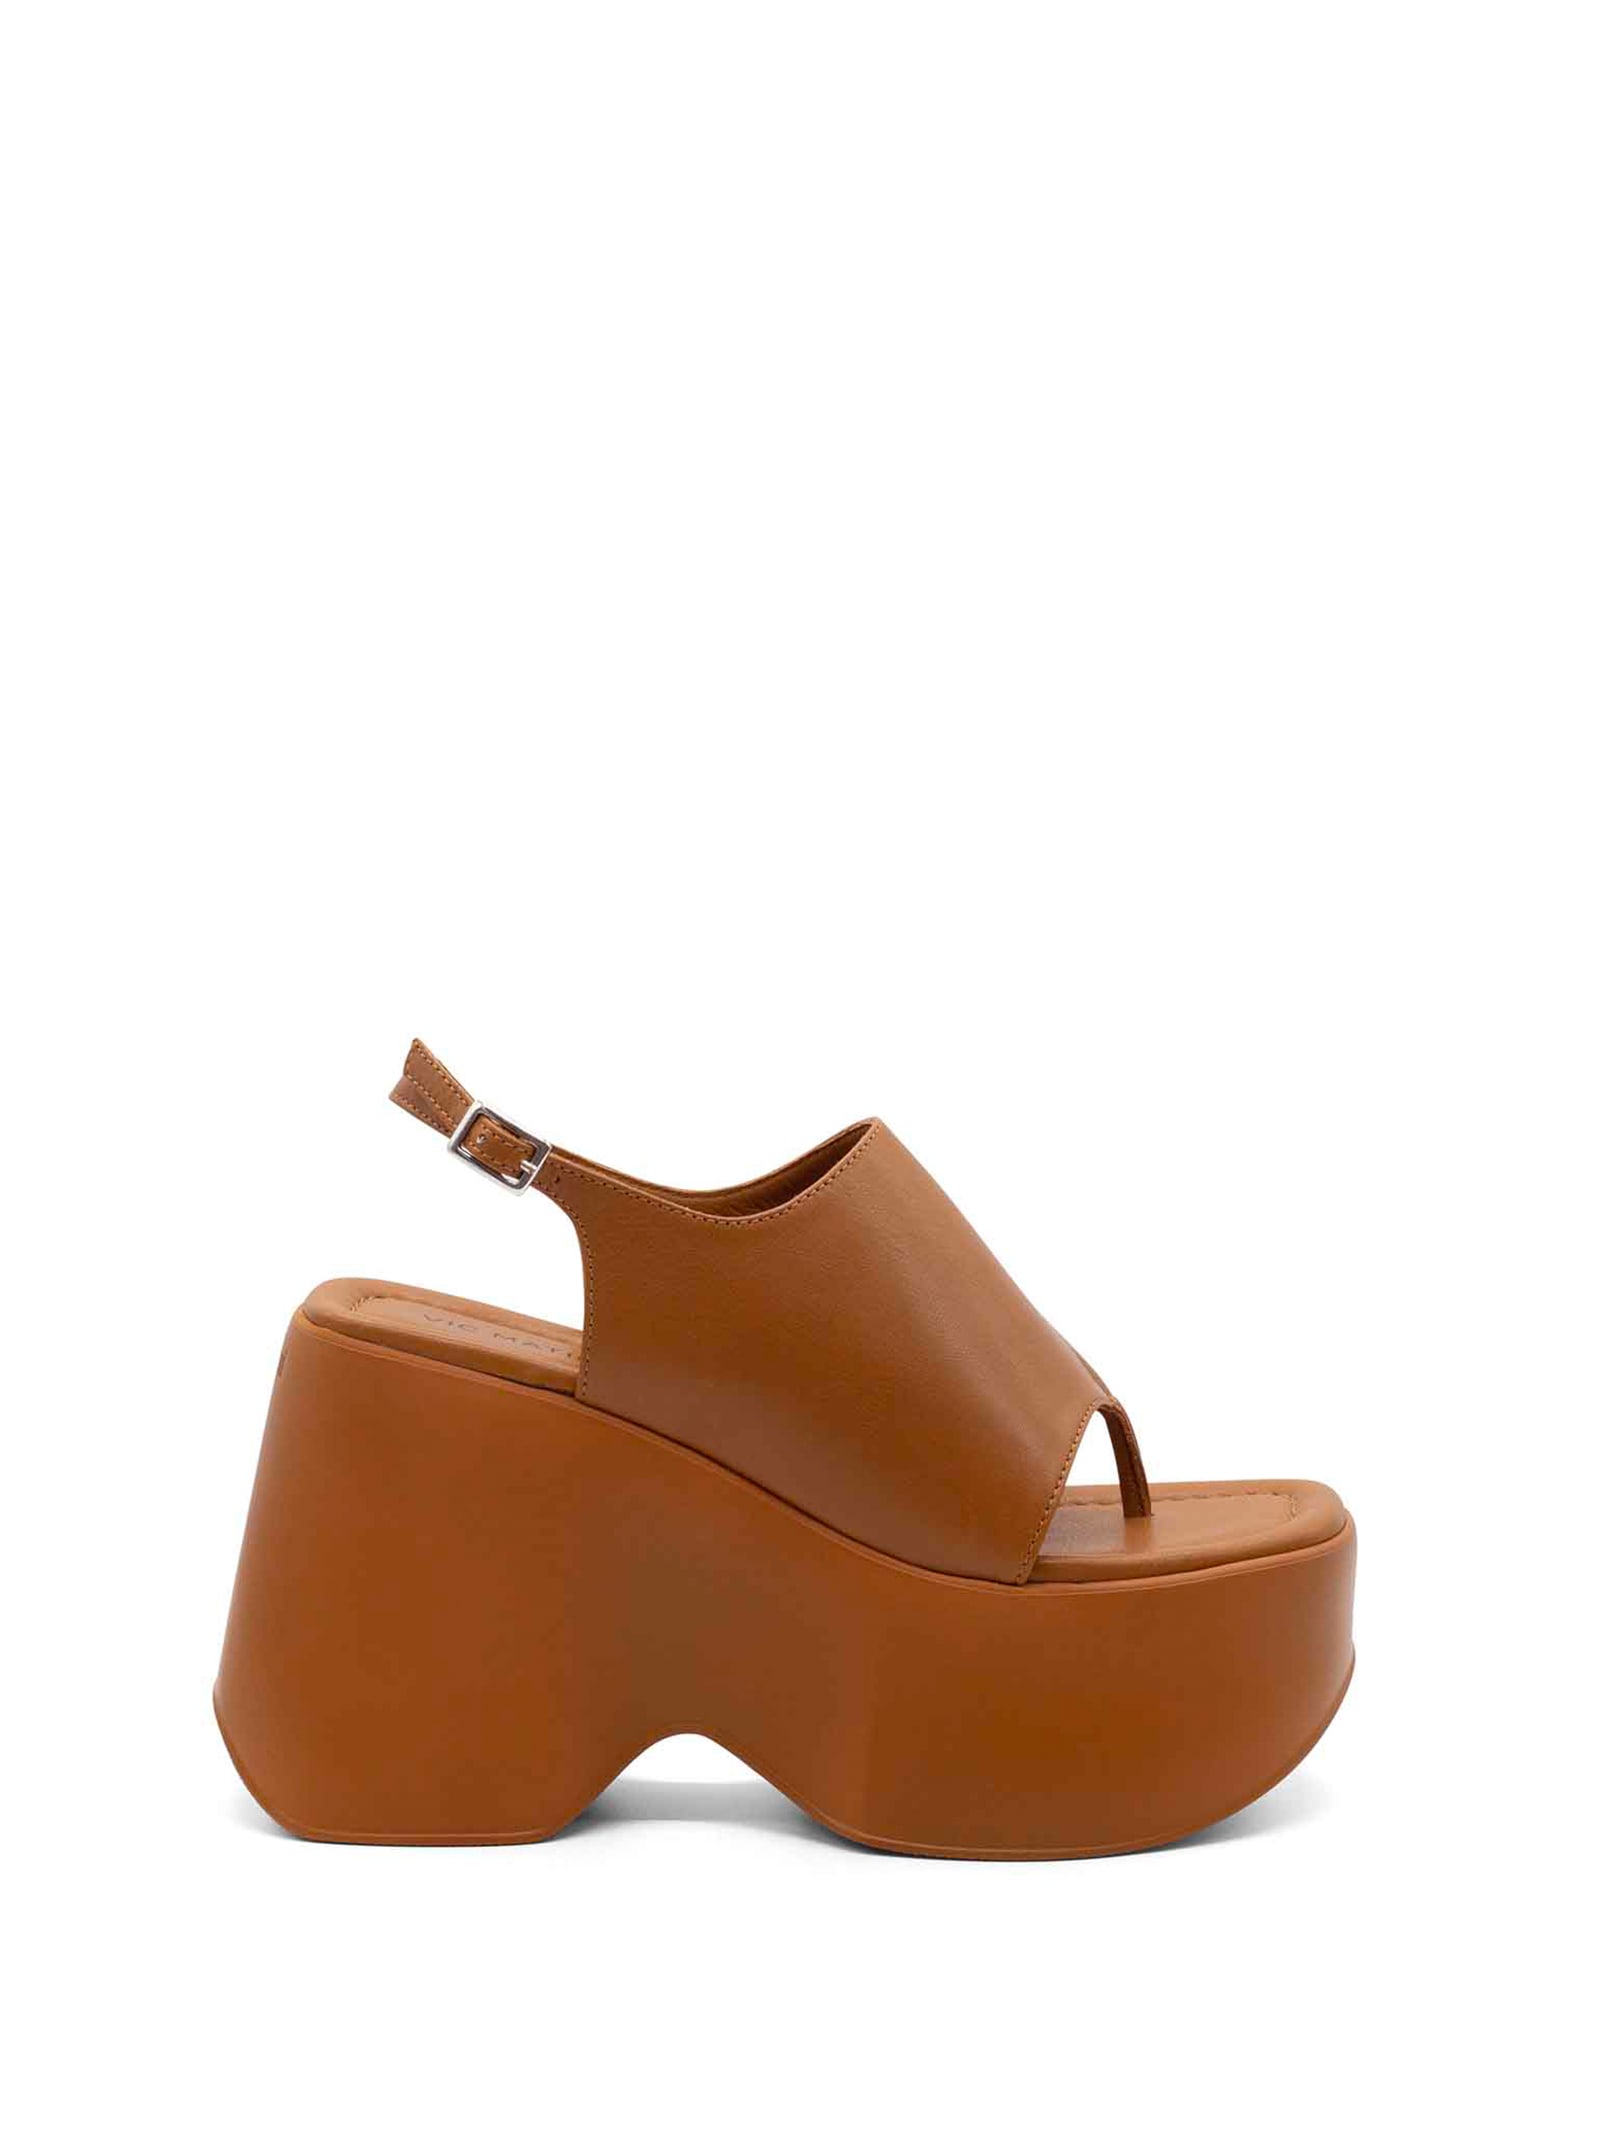 Vic Matié Tobacco Leather Flip-flops With Wedge